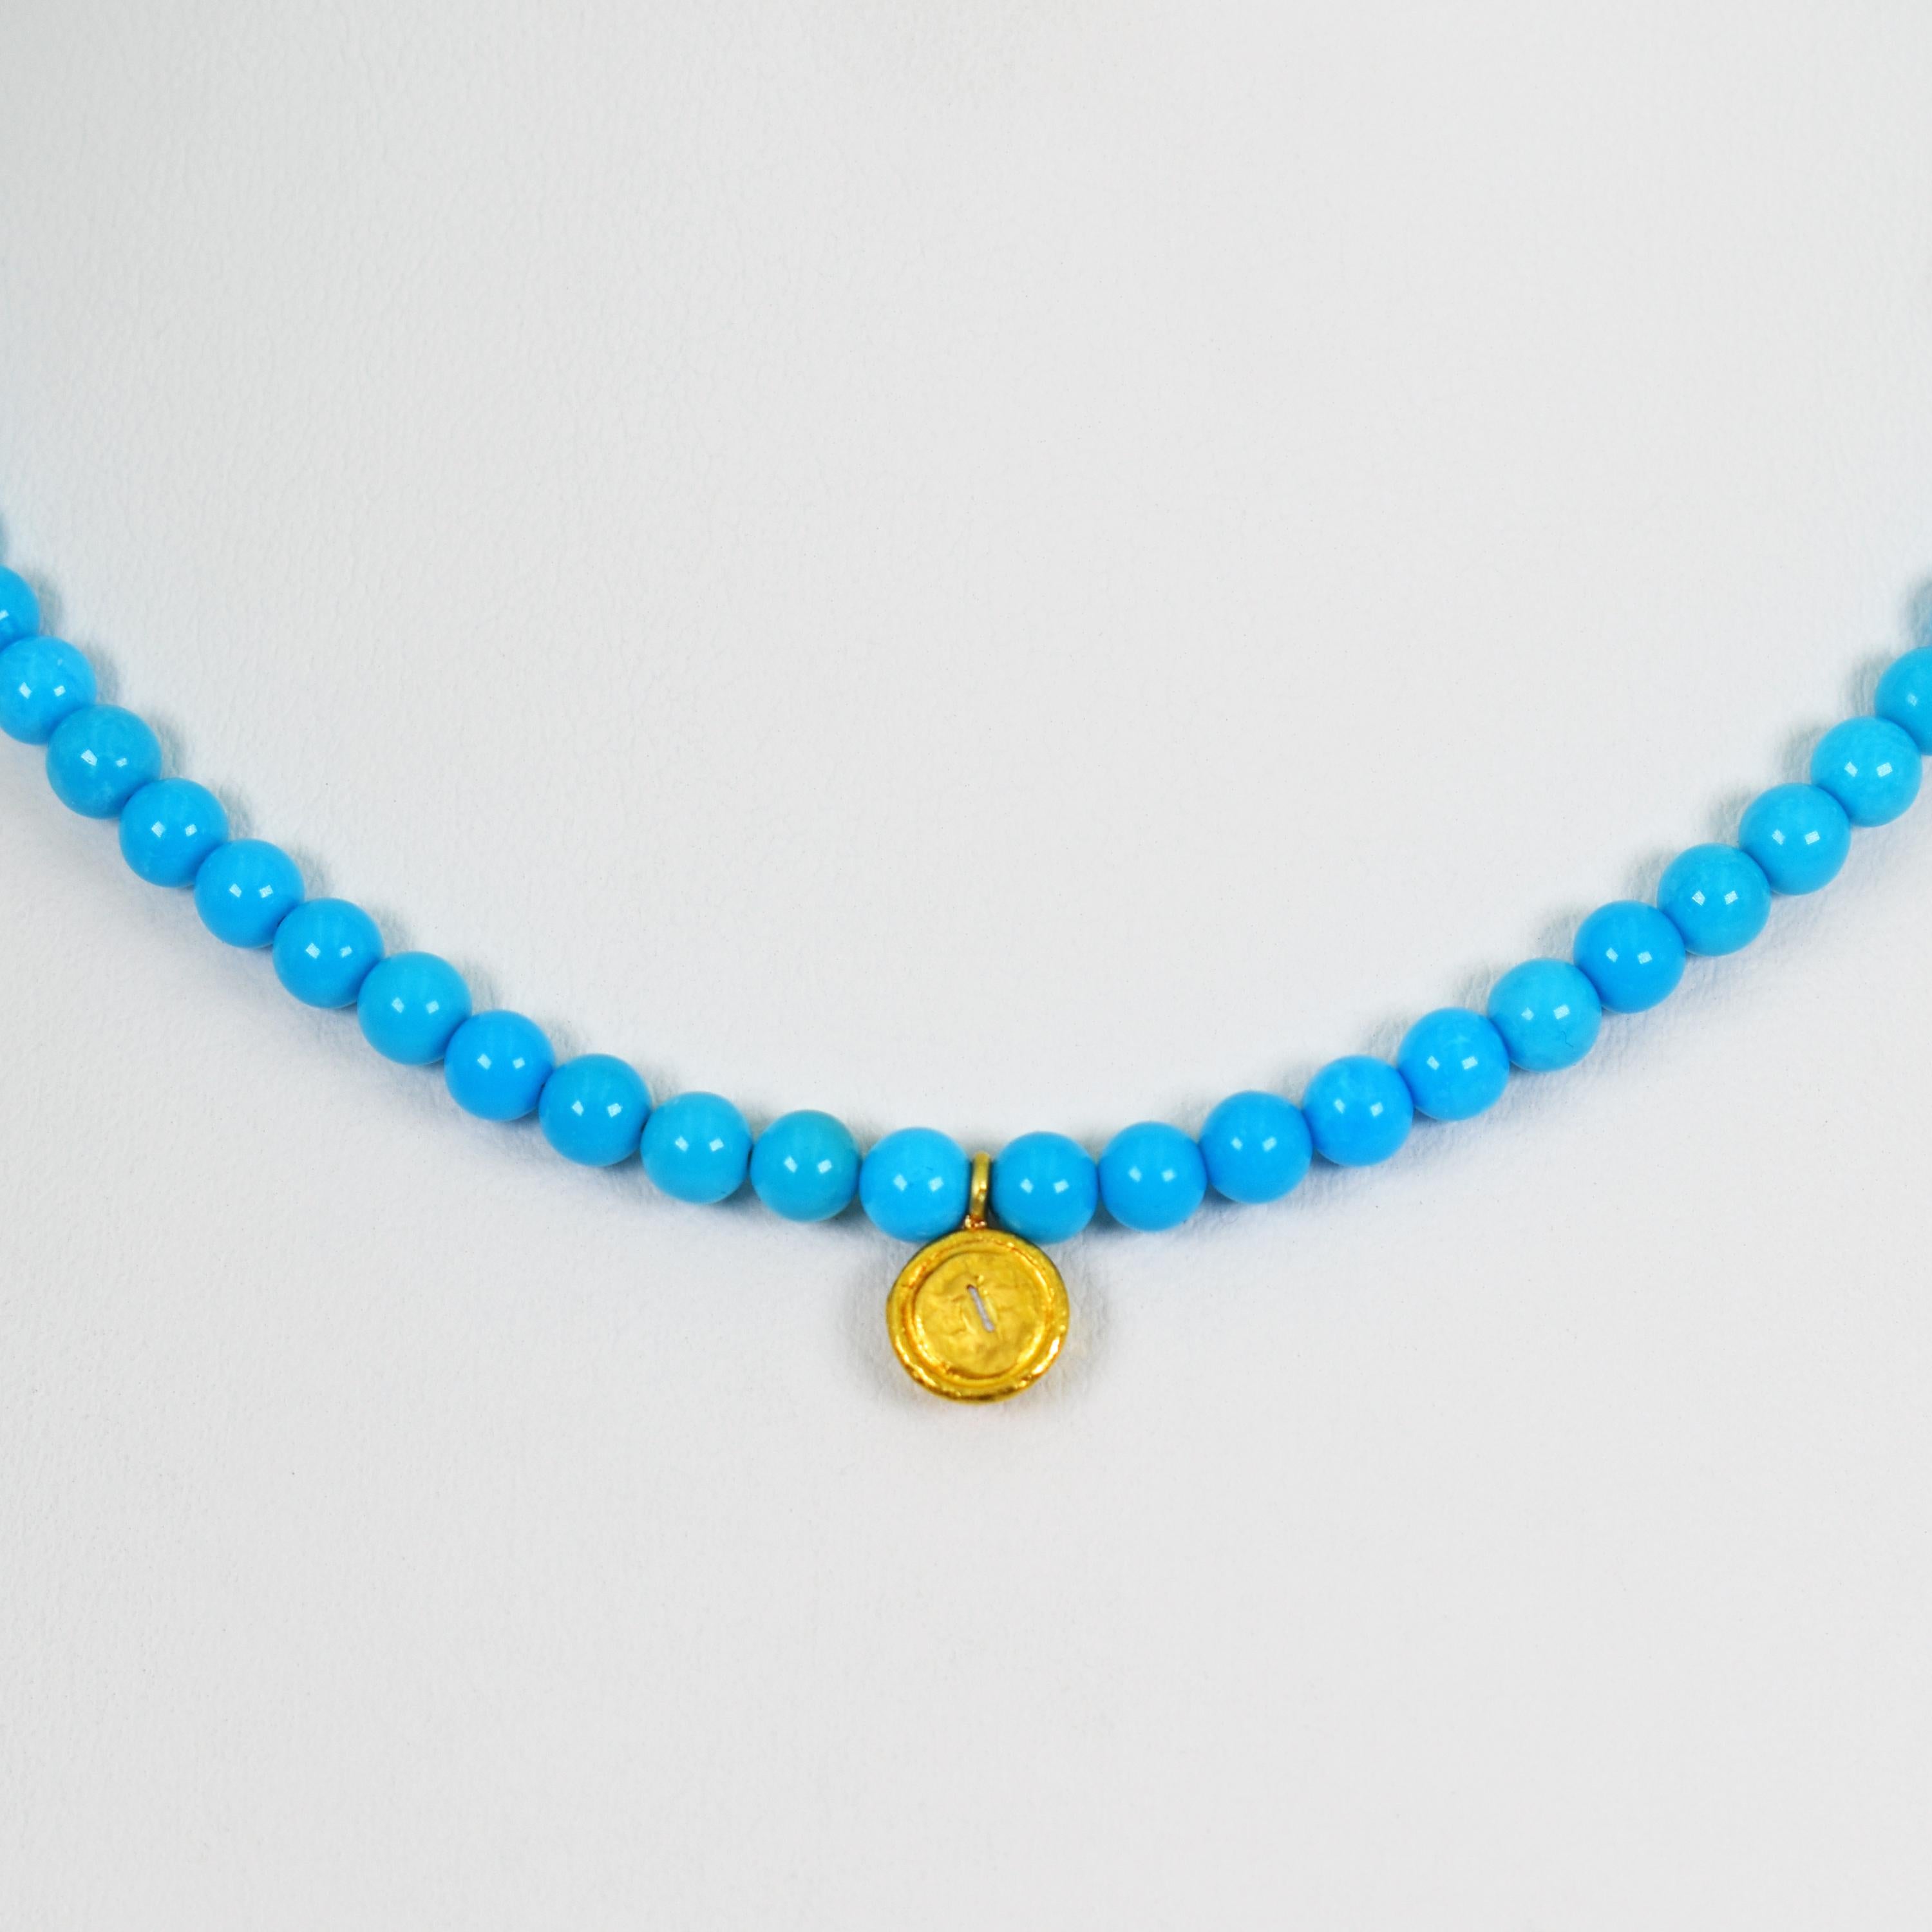 Contemporary Blue Opal, 22 Karat Gold, and Sleeping Beauty Turquoise Beaded Pendant Necklace